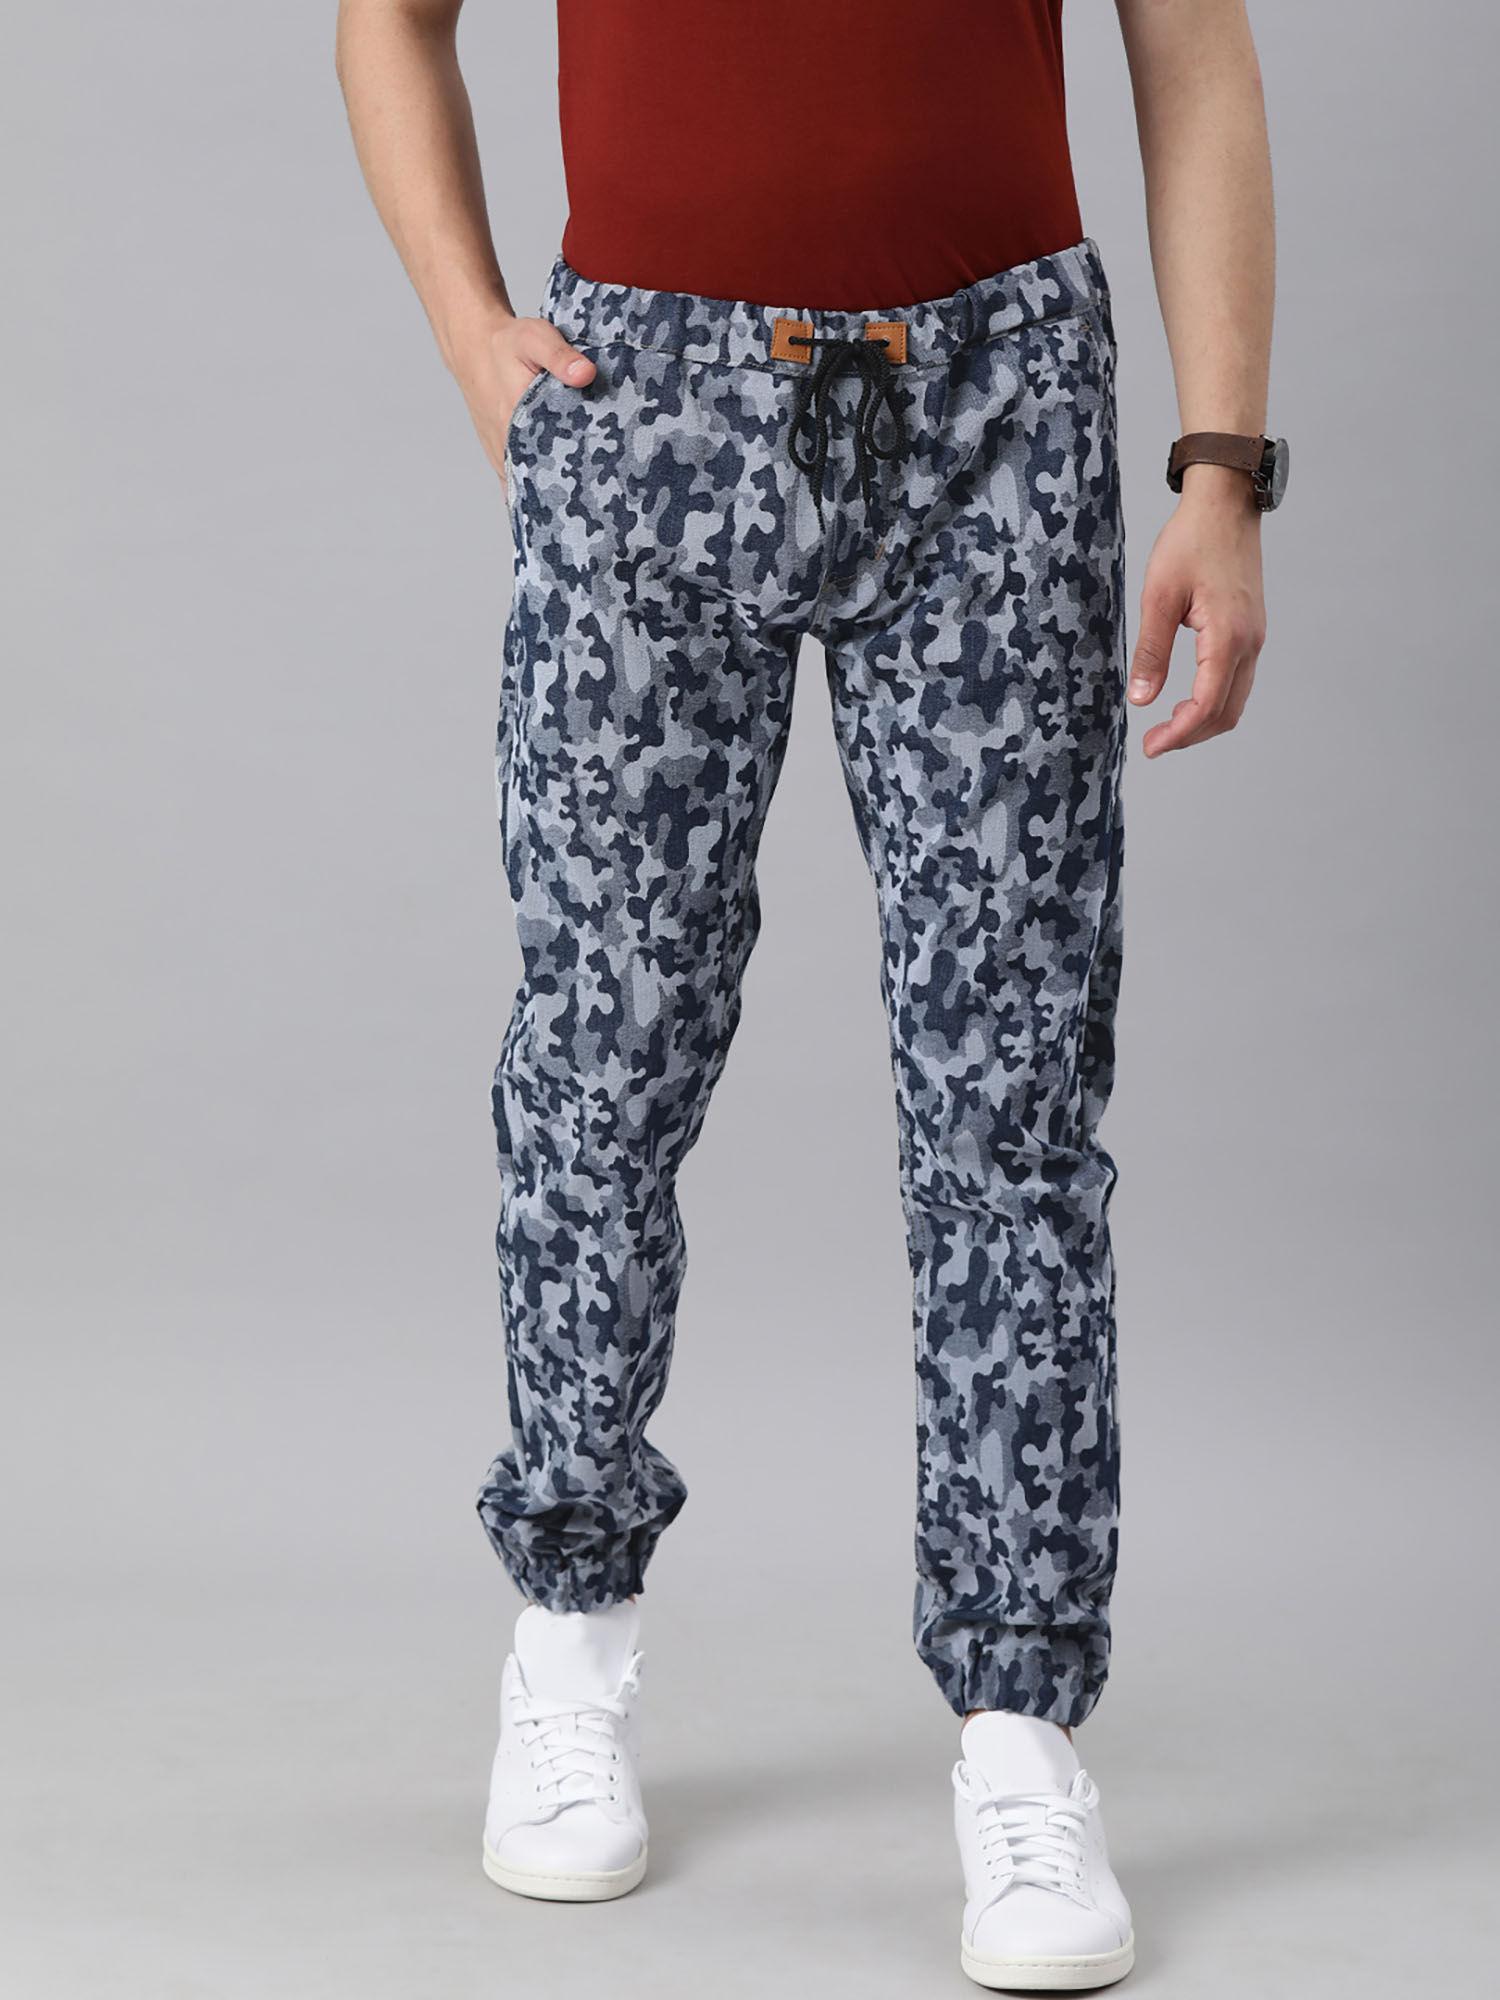 mens blue camouflage printed jogger jeans slim fit stretch